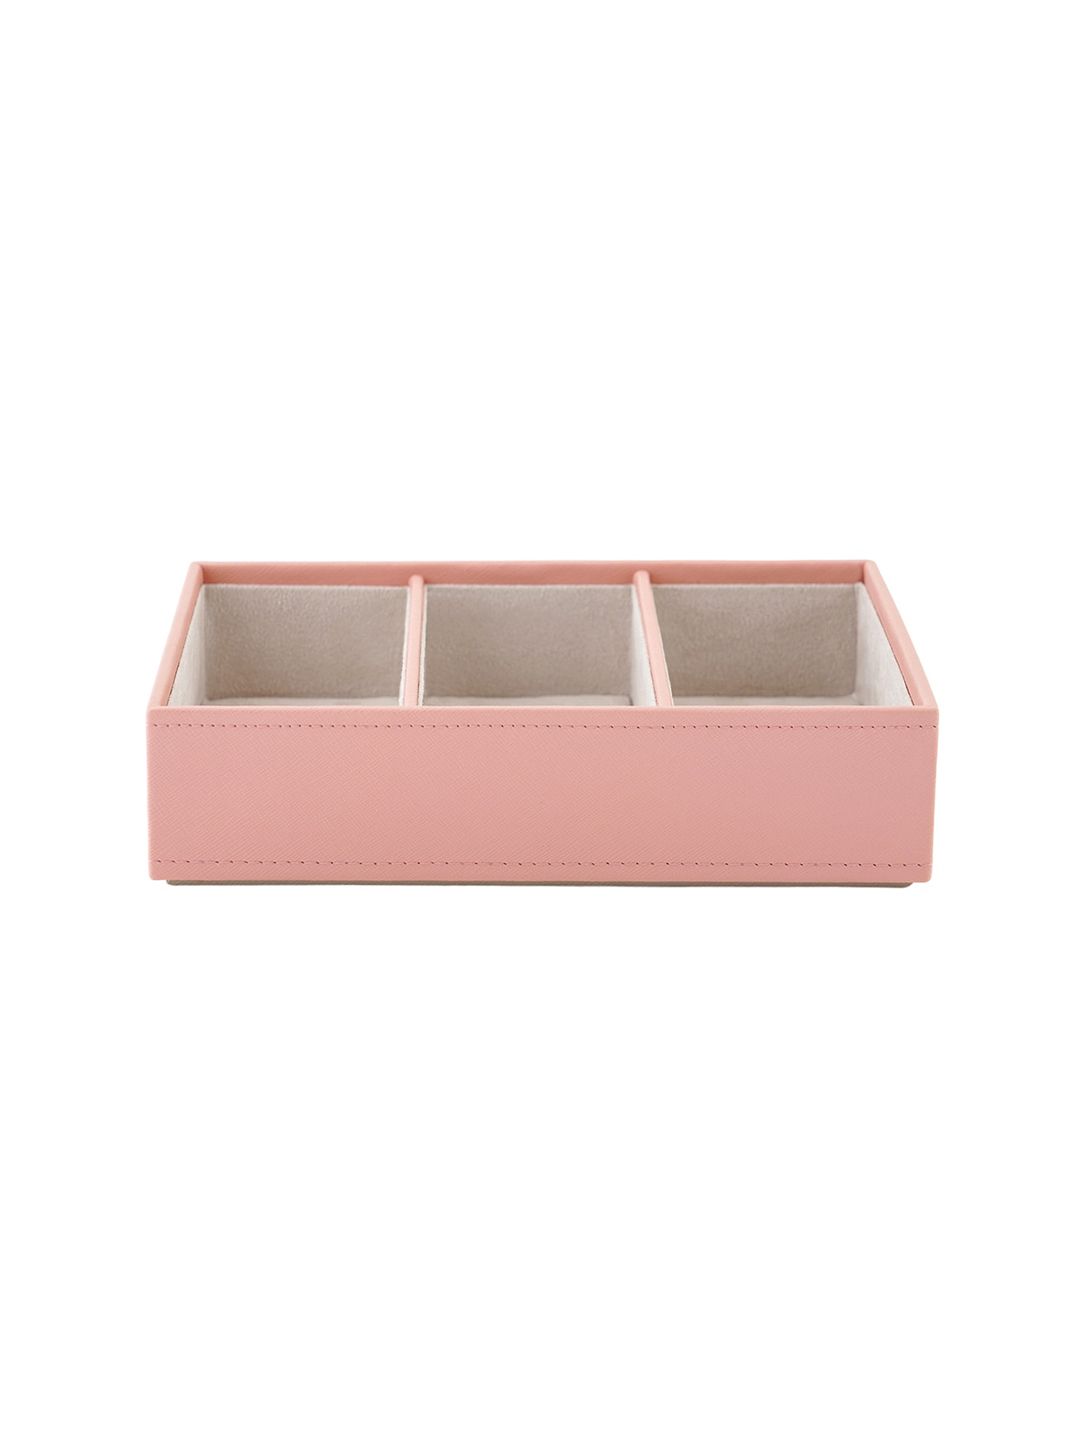 Pure Home and Living Pink Solid 3-Compartment Tray Price in India